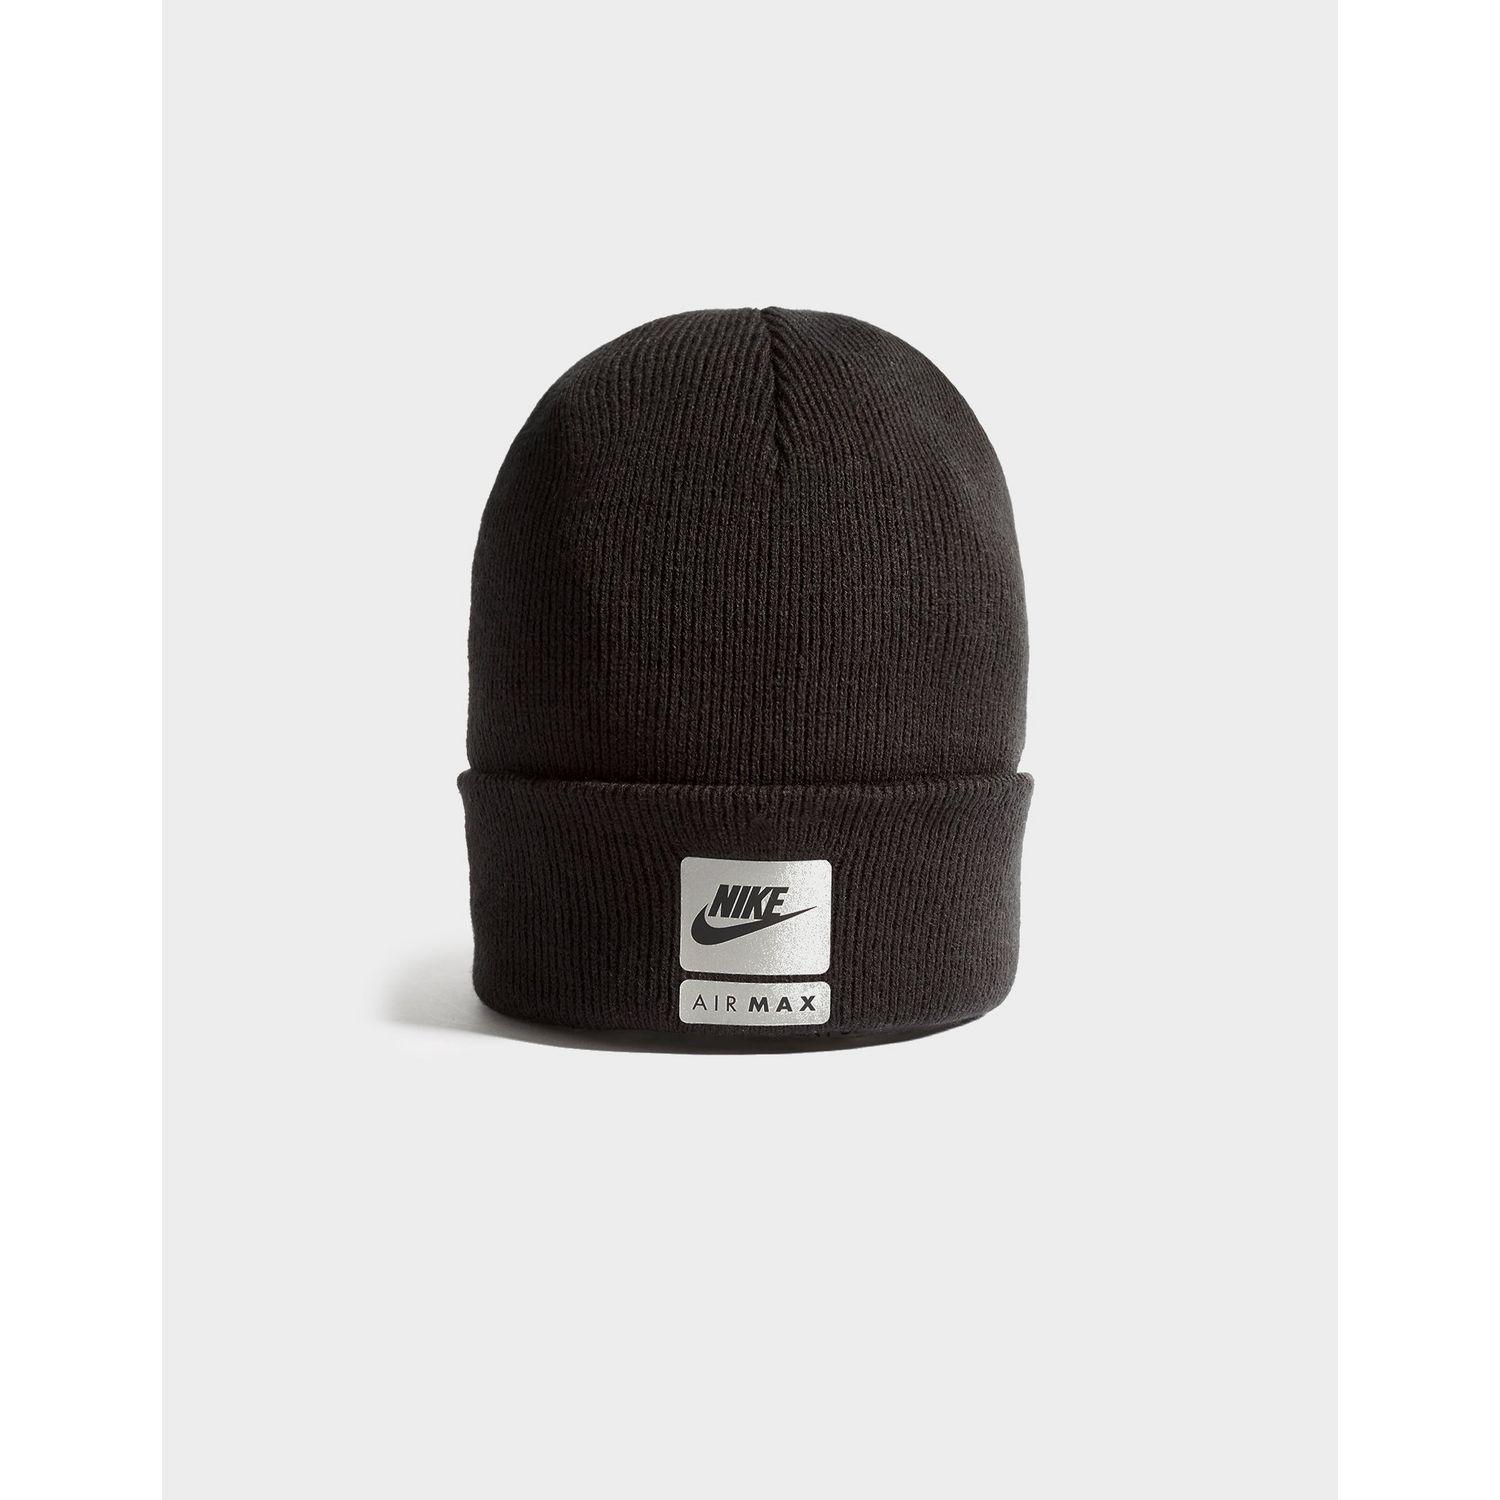 Nike Synthetic Air Max Beanie in Black 